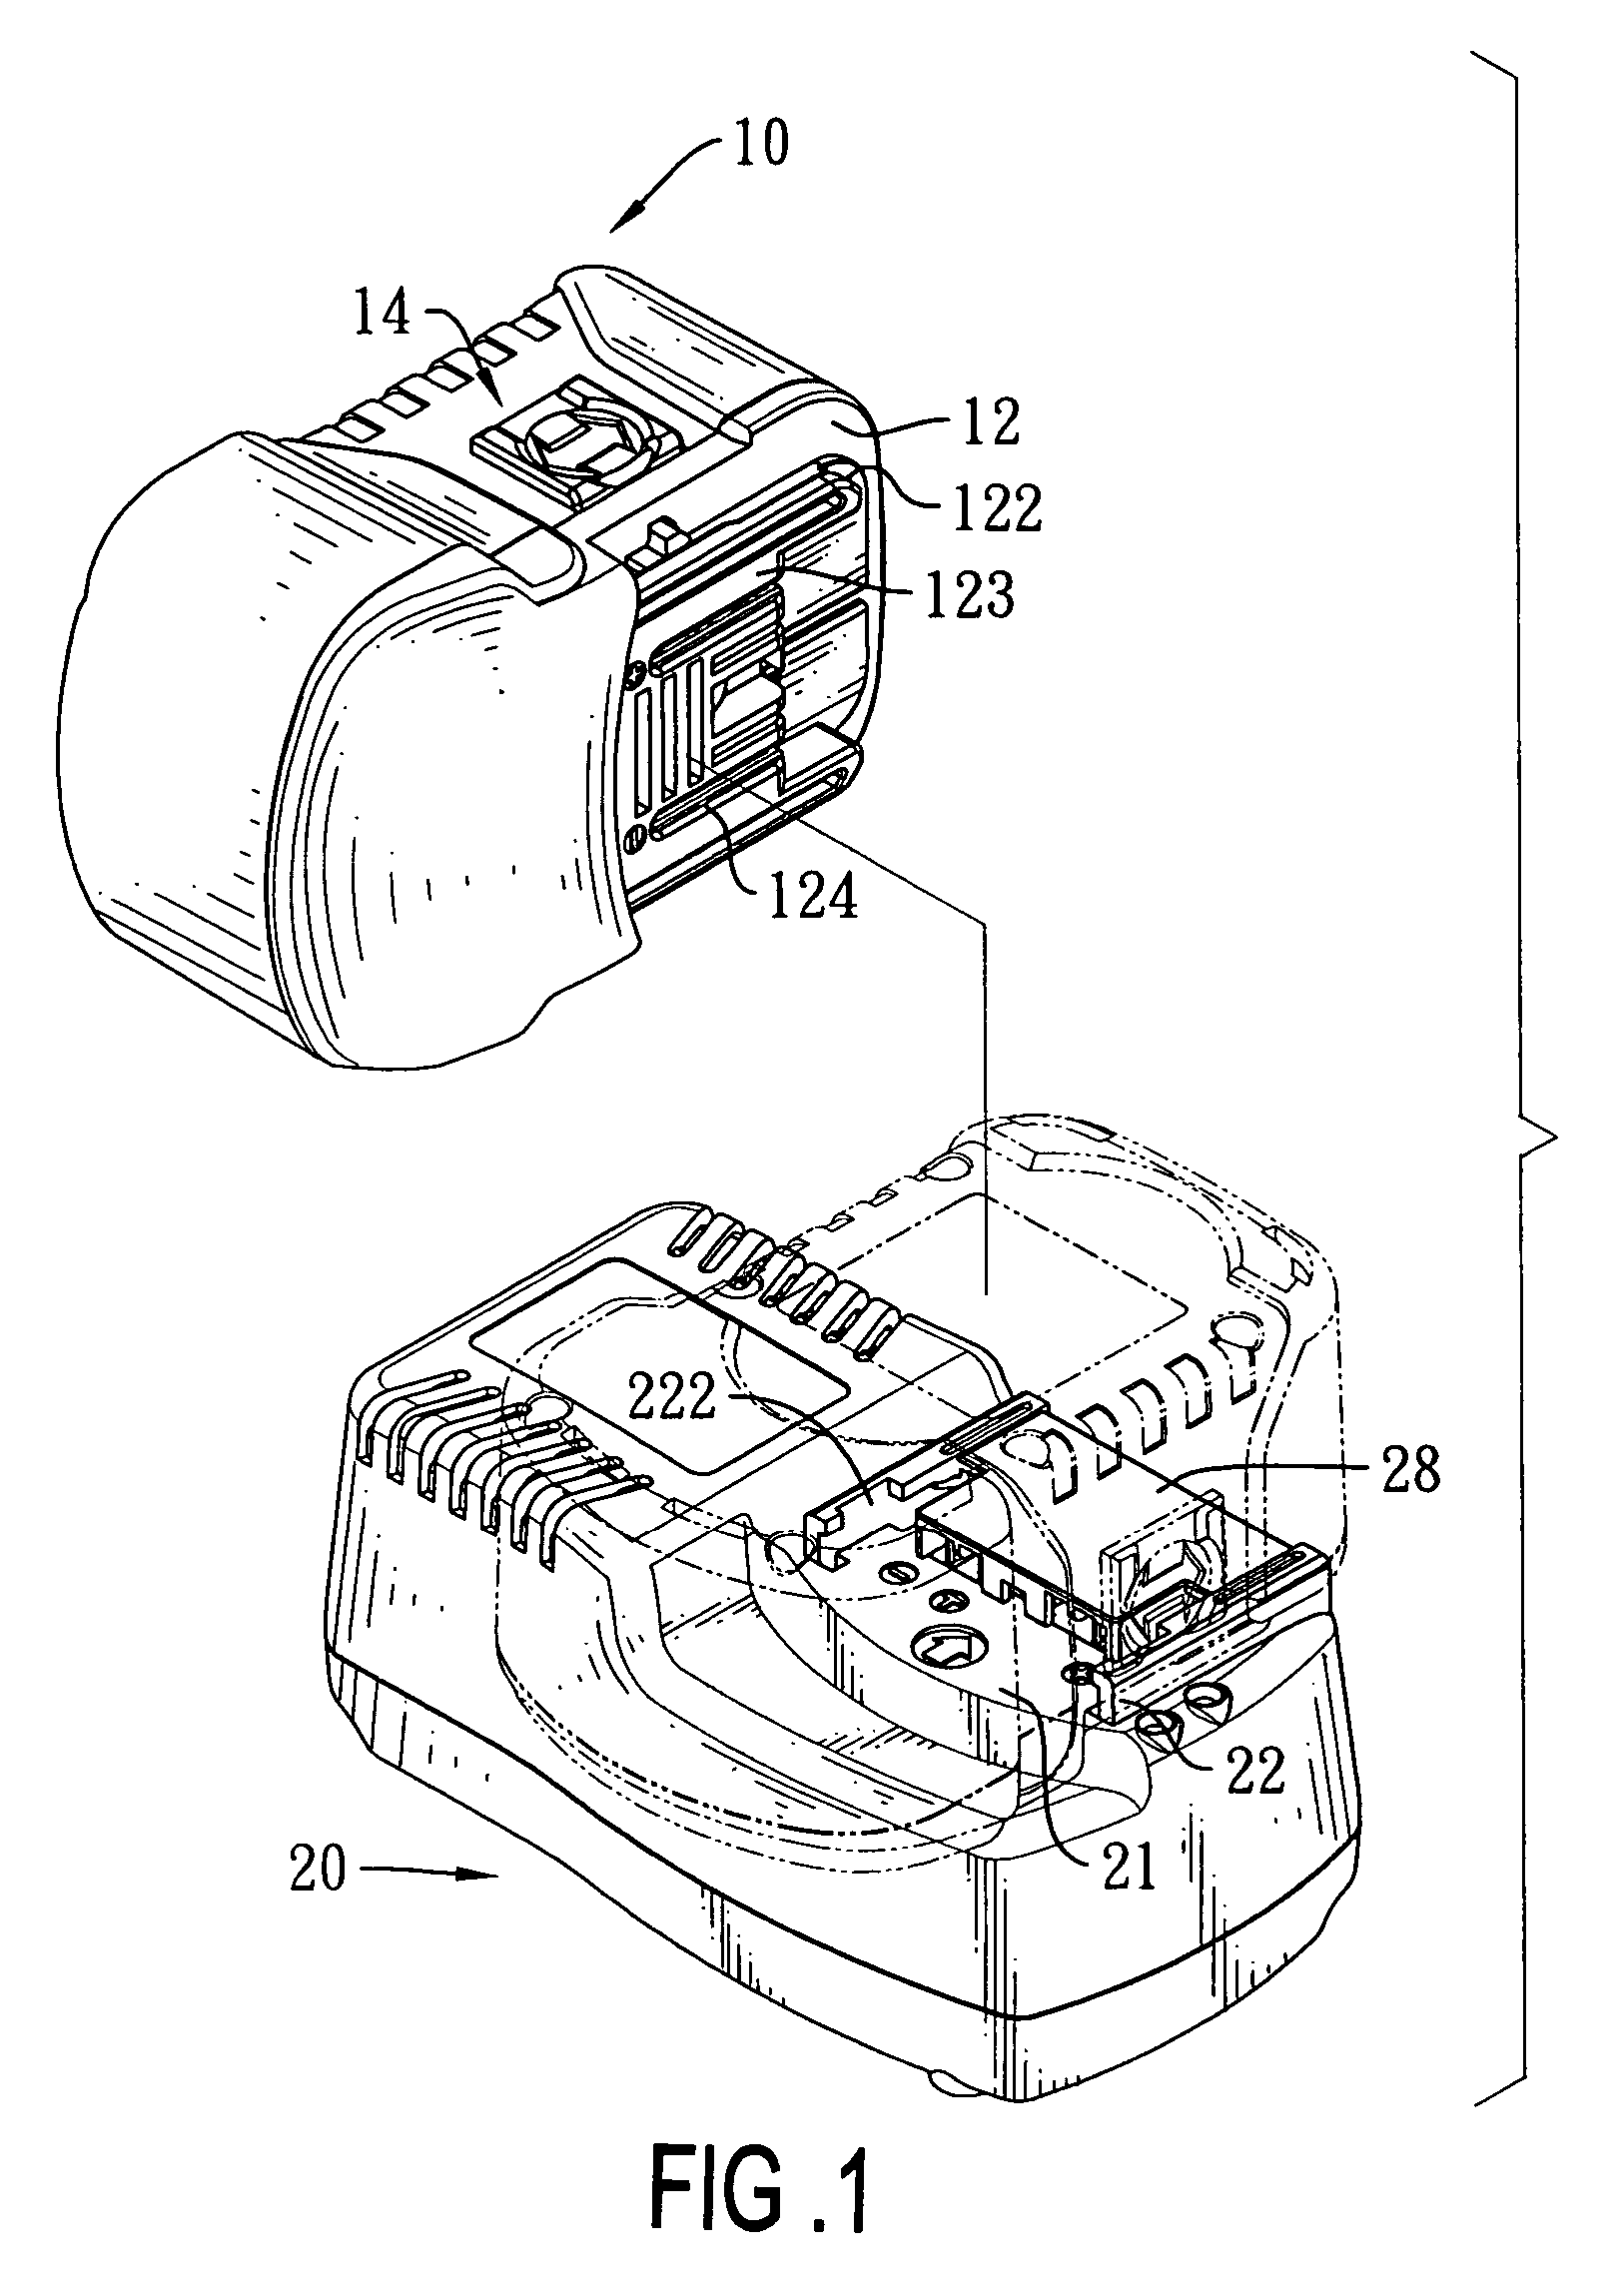 Charger assembly for a power cell for an electrical tool